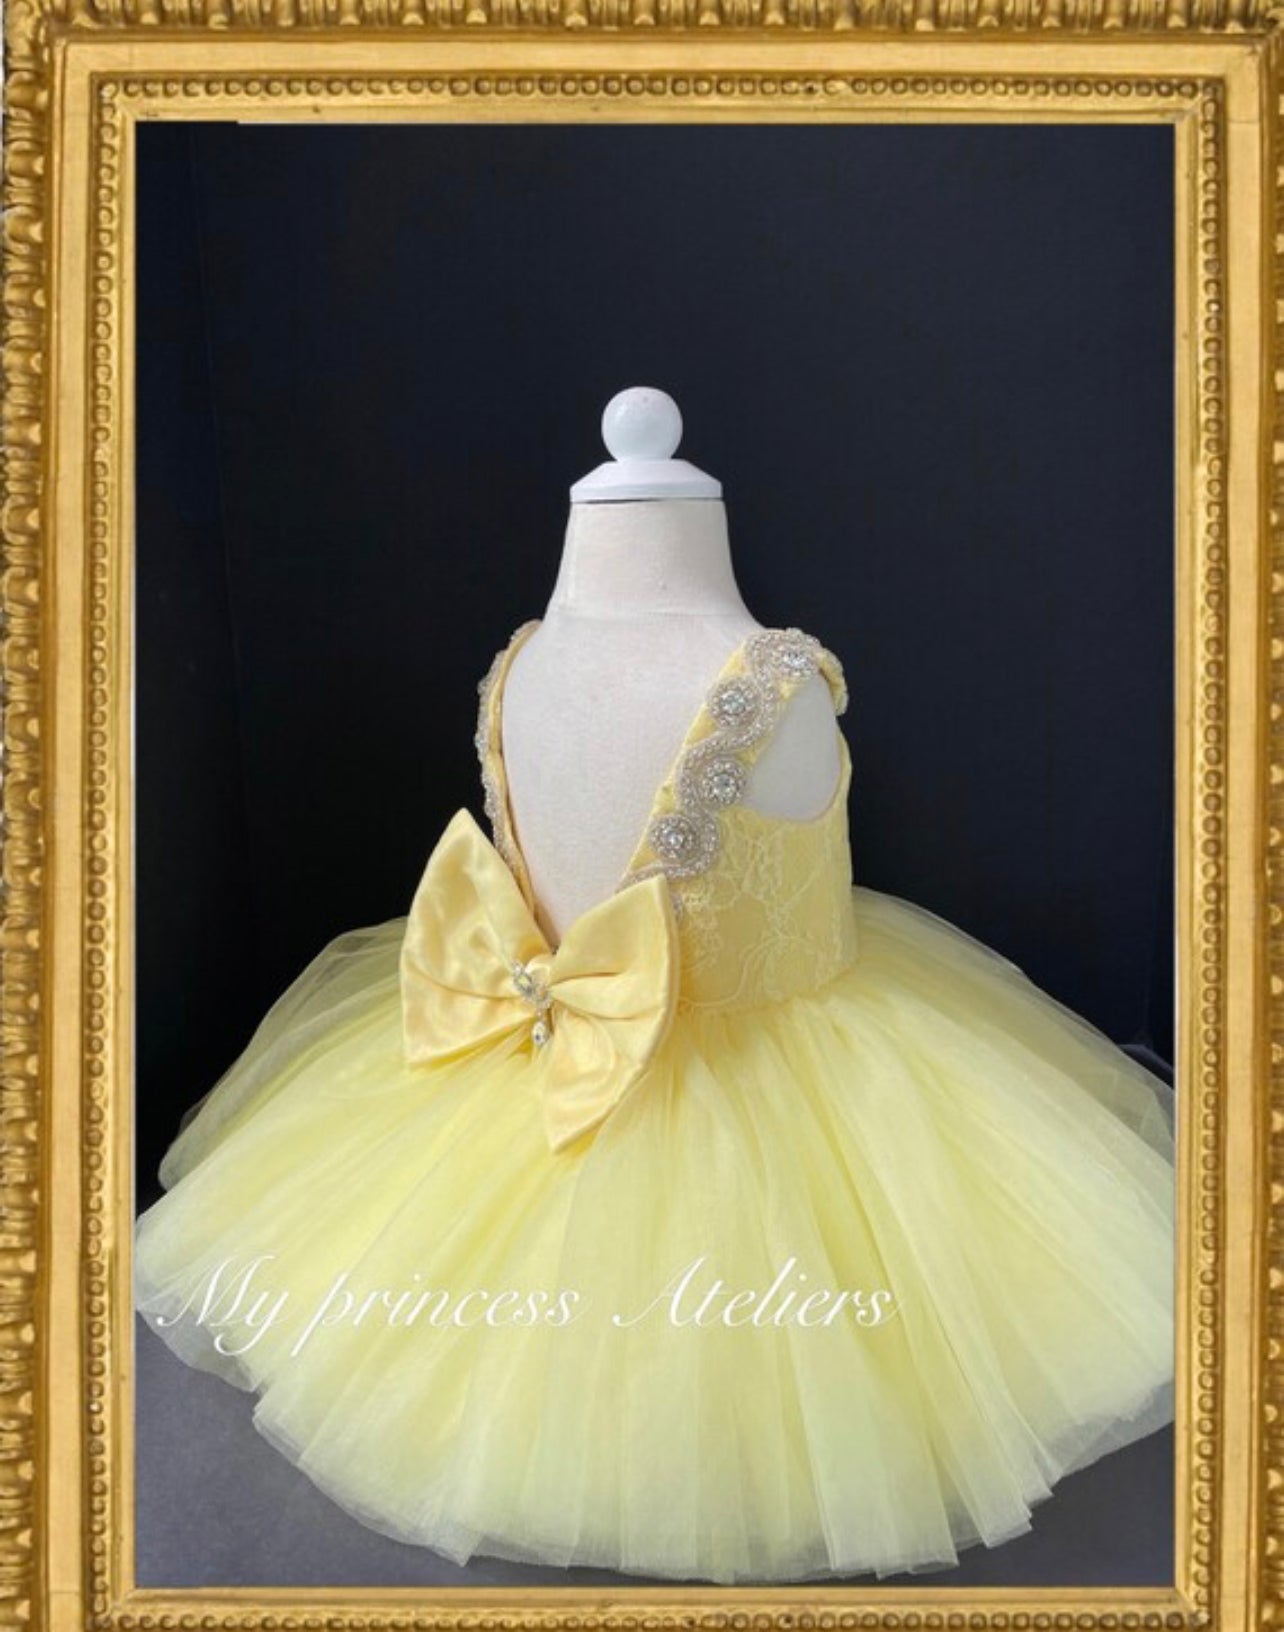 Little Girls Formal Dresses | Yellow Ruffle Tulle Belted Party Dress – Mia  Belle Girls